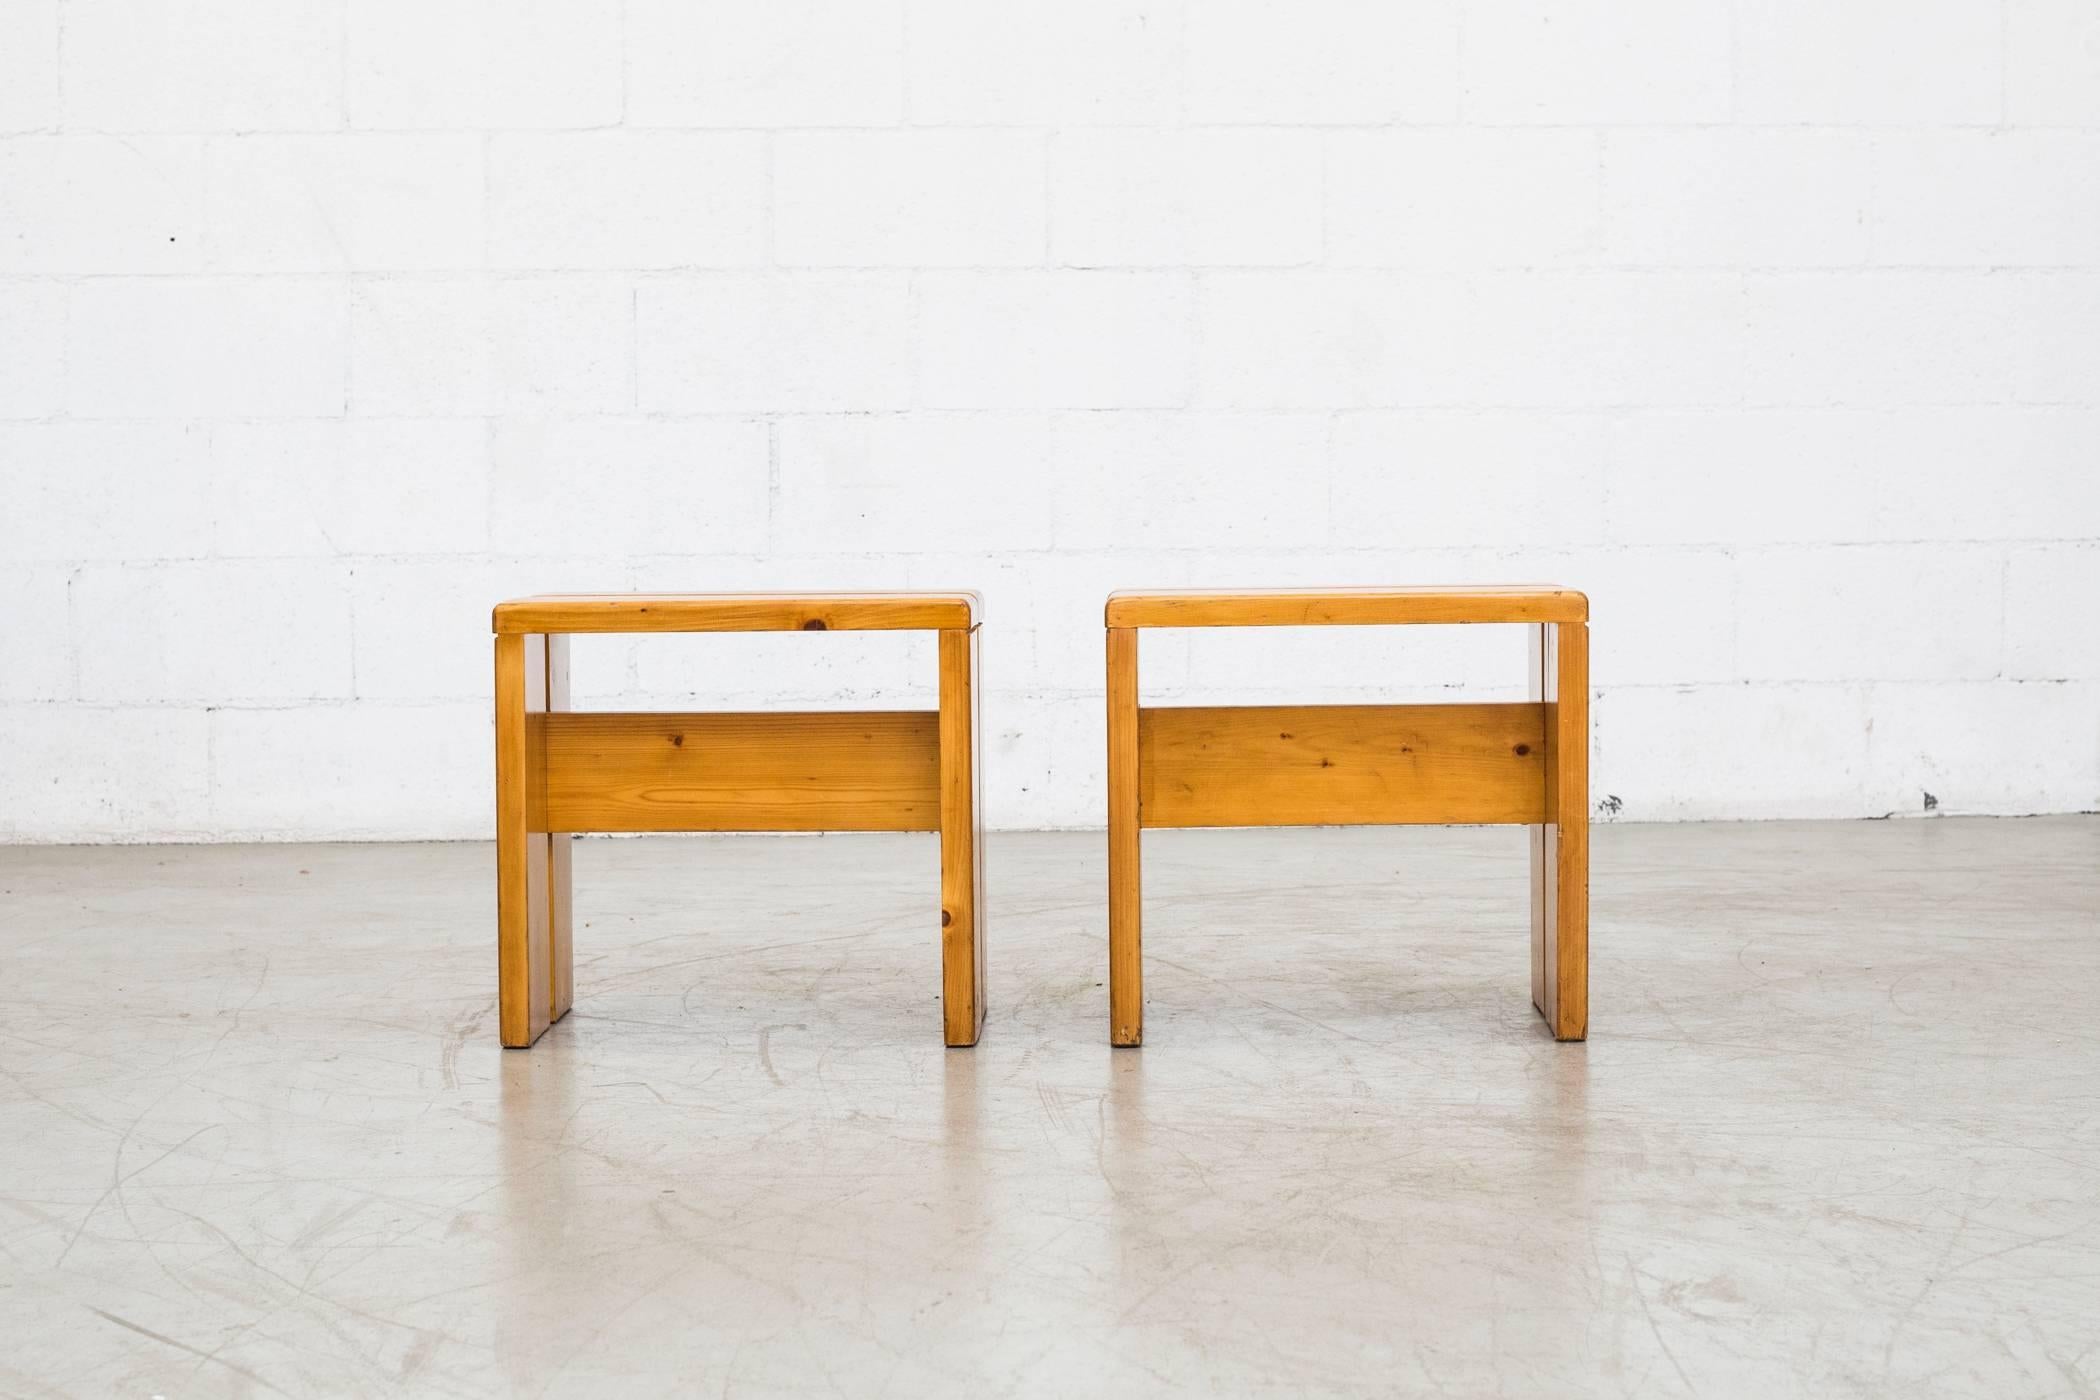 Charlotte Perriand solid pine stools from Les Arcs, France, circa 1968. In good original condition with some wear to surface consistent with age and use. Wood grains vary from set to set. Larger bench version available (S698) set price.